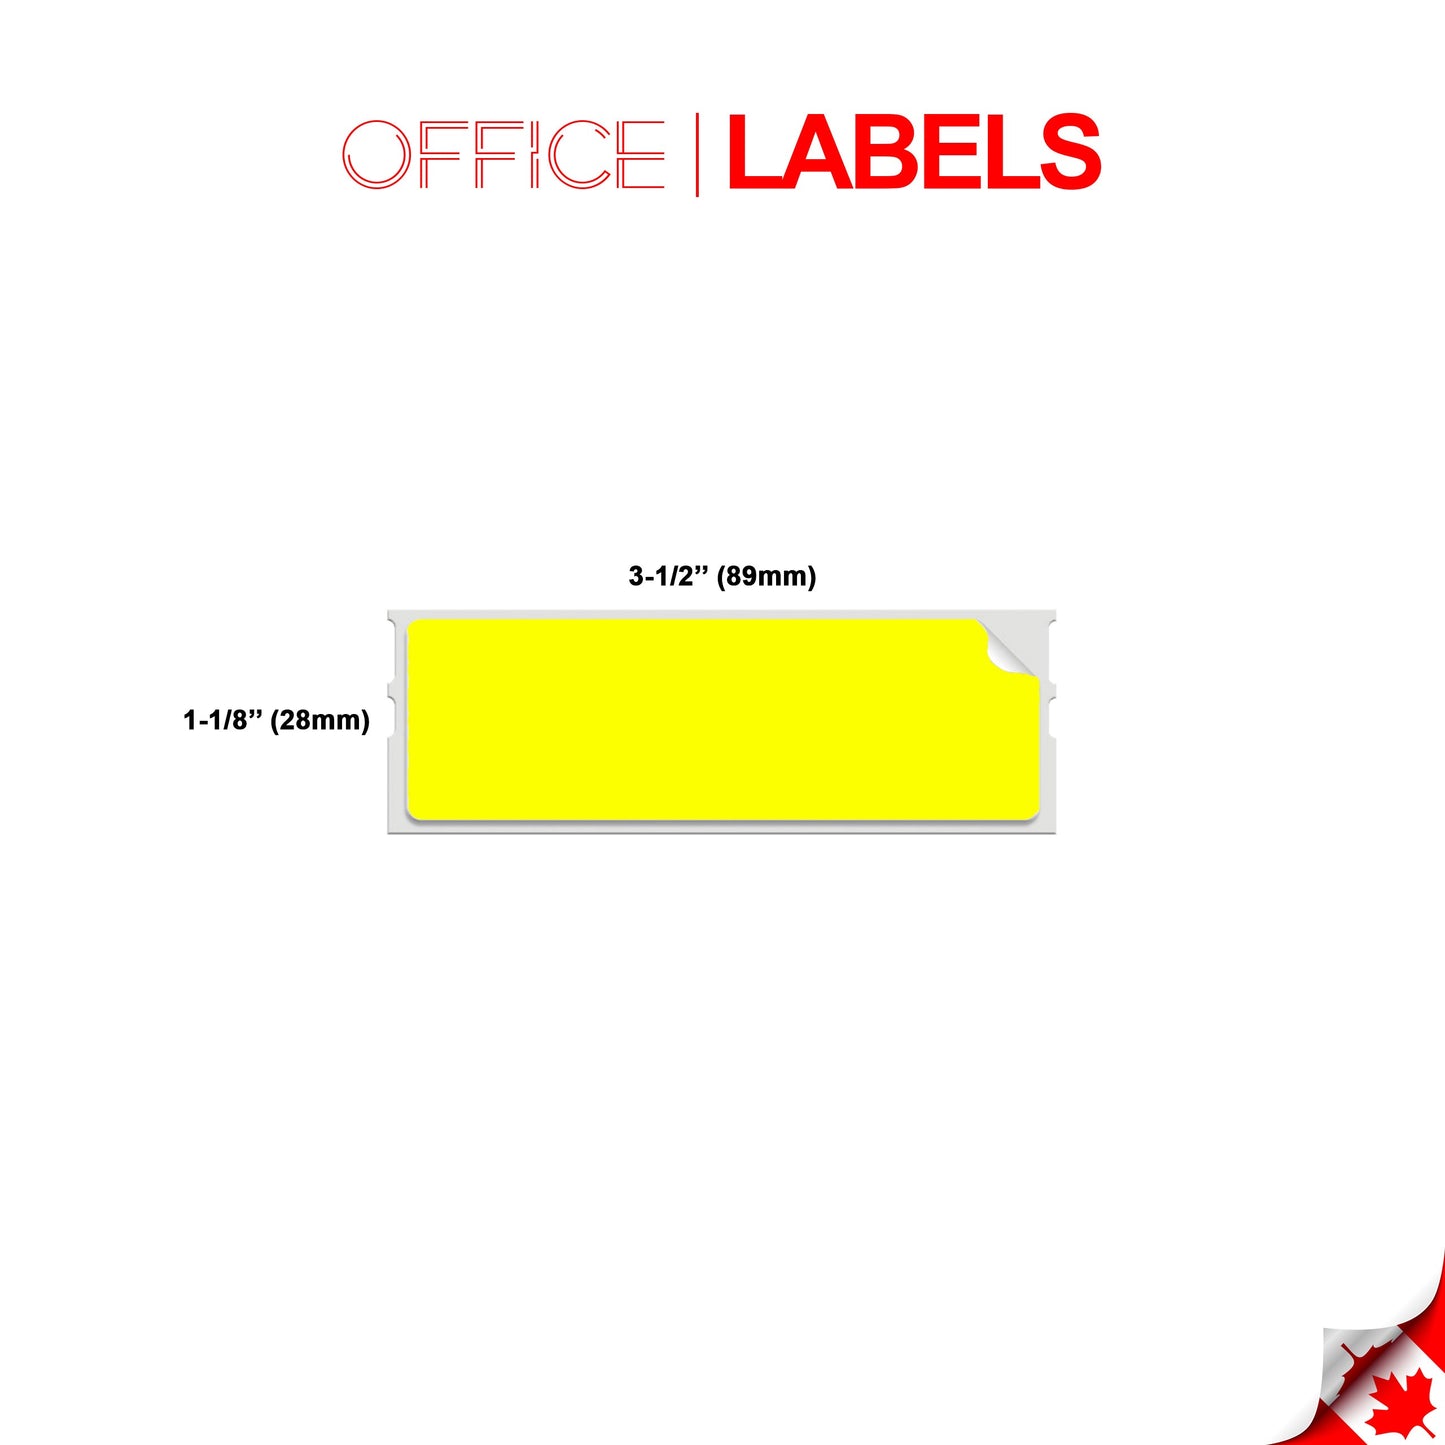 10 Rolls of 30252 Yellow Compatible Labels for DYMO 1-1/8" X 3-1/2" (28mm x 89mm)